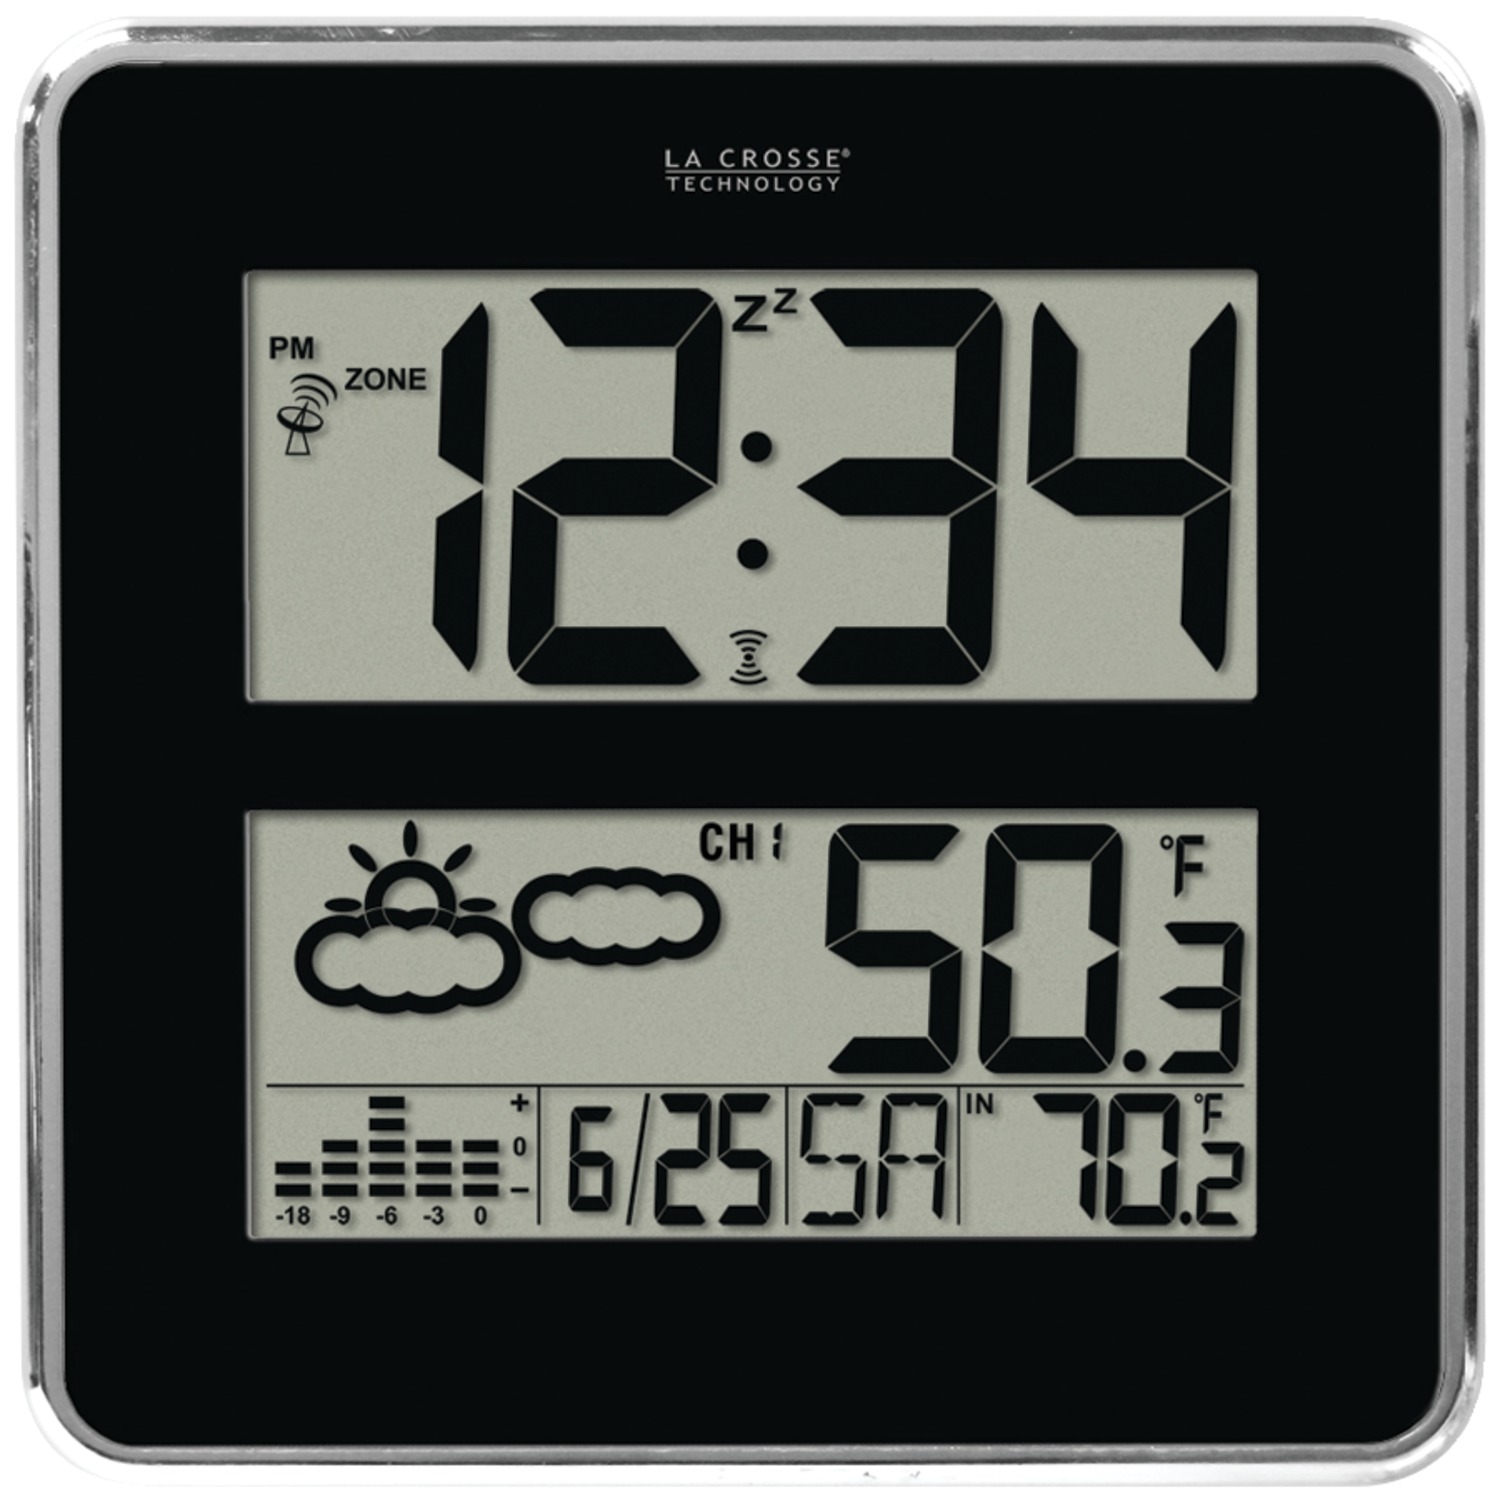 Atomic Digital Wall Clock with Forecast and Weather